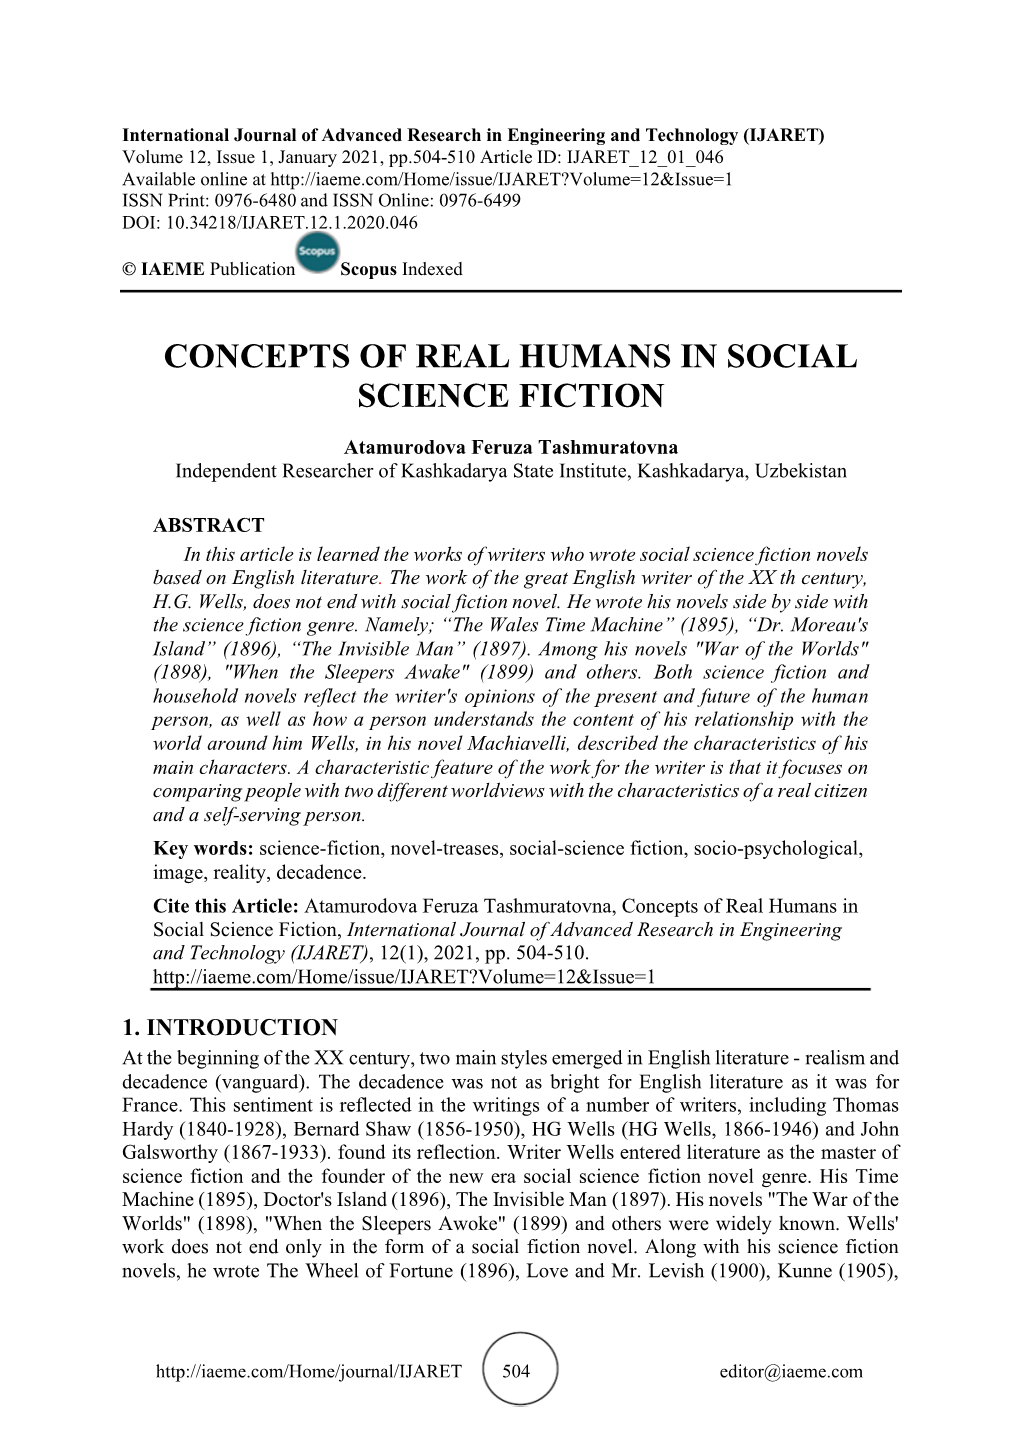 Concepts of Real Humans in Social Science Fiction